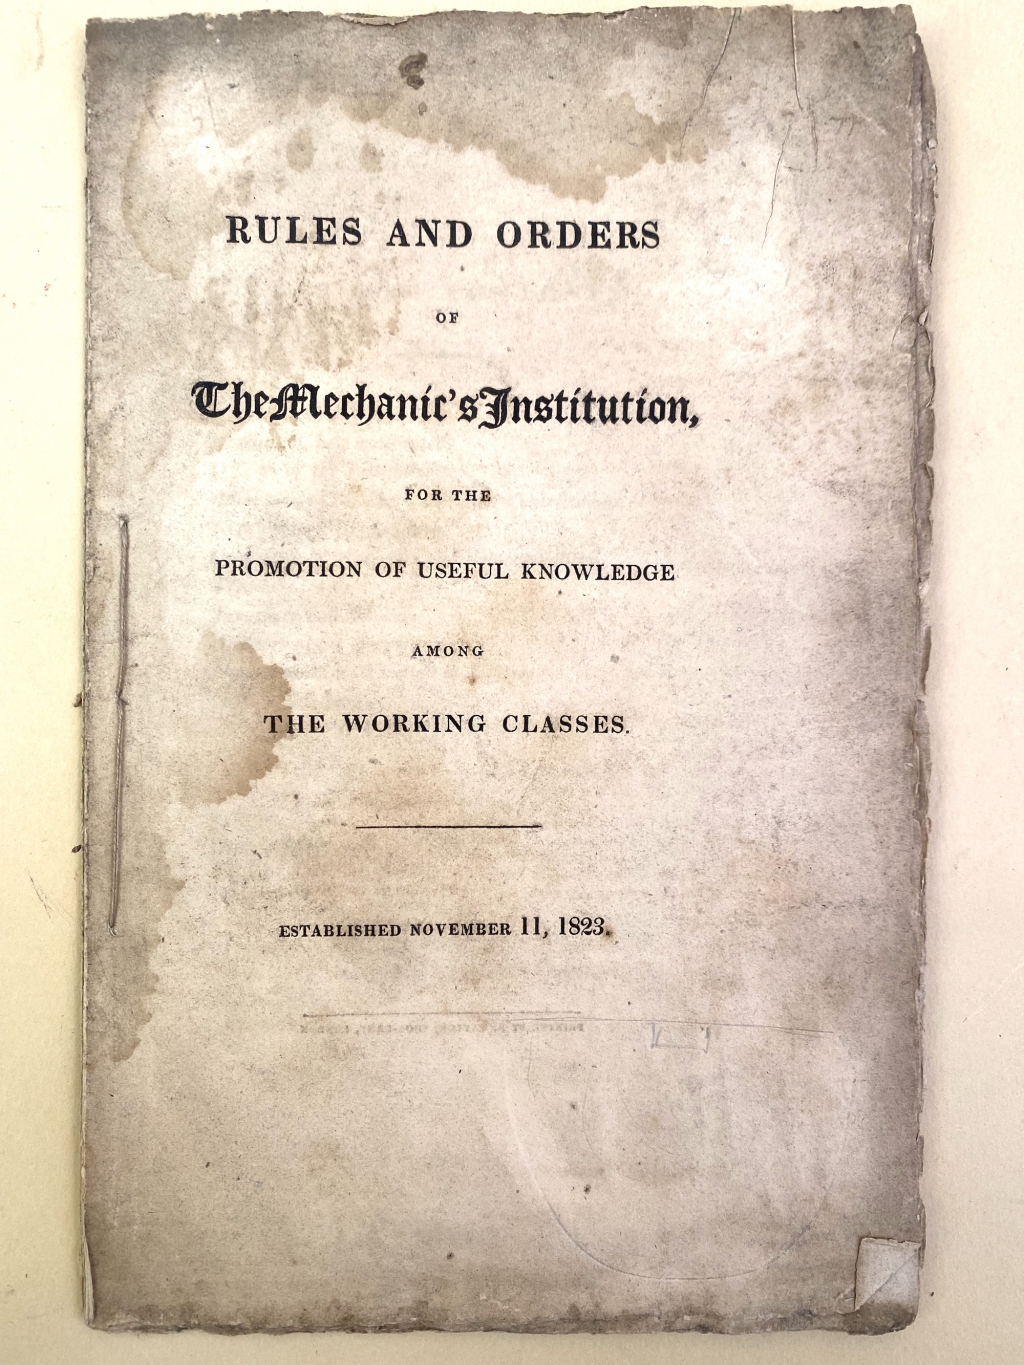 This soiled and stained copy was probably one of the earliest publications of the London Mechanic's Institution. The attribution to the London branch comes from the printer, Richard Taylor of